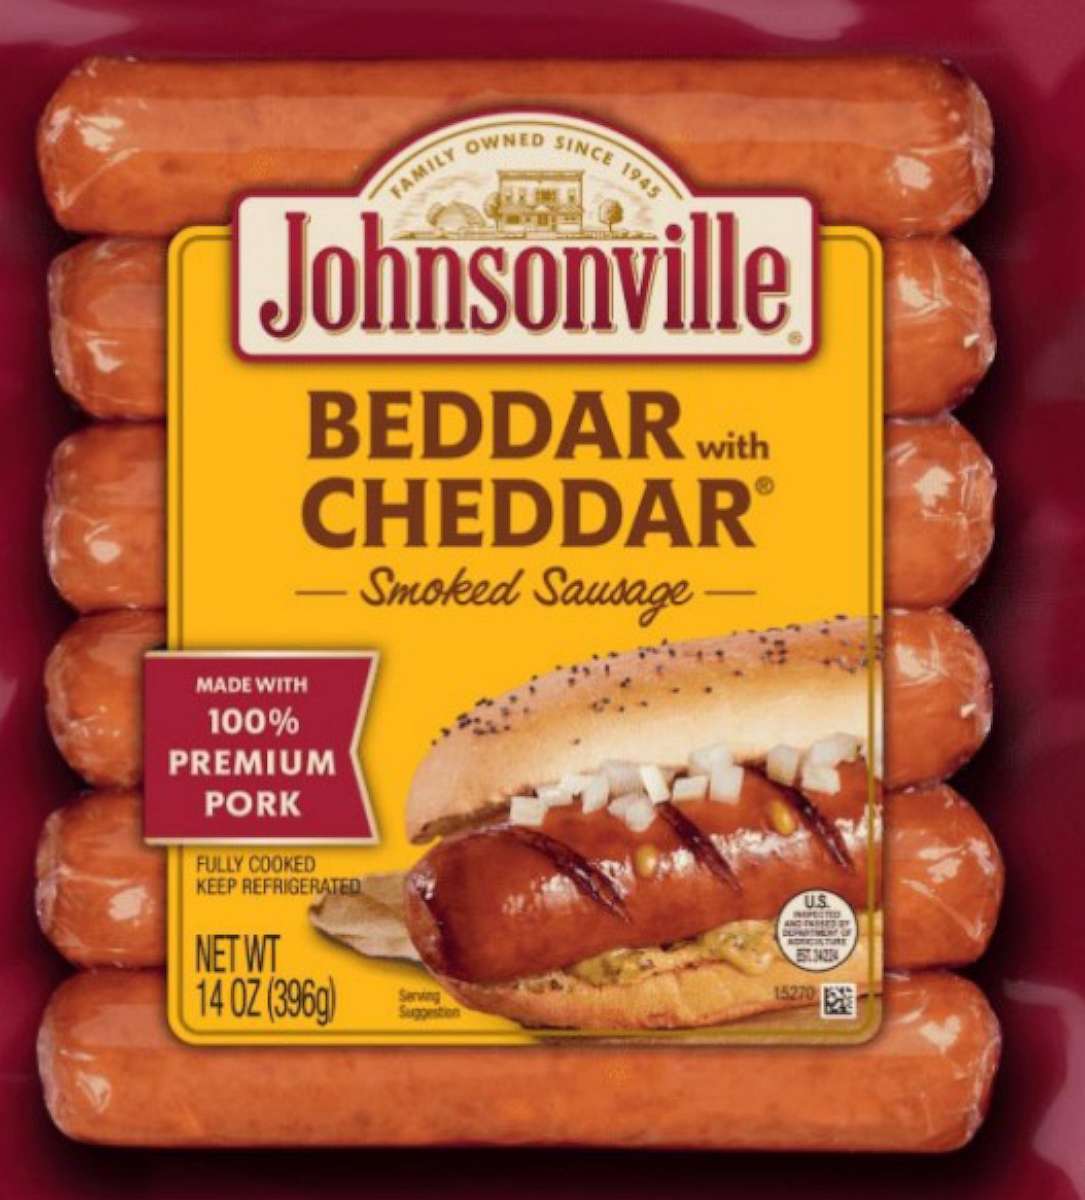 PHOTO: Nearly 42K pounds of Johnsonville ready-to-eat pork and cheddar sausages were recalled by the U.S. Department of Agriculture due to plastic fiber contamination concerns.